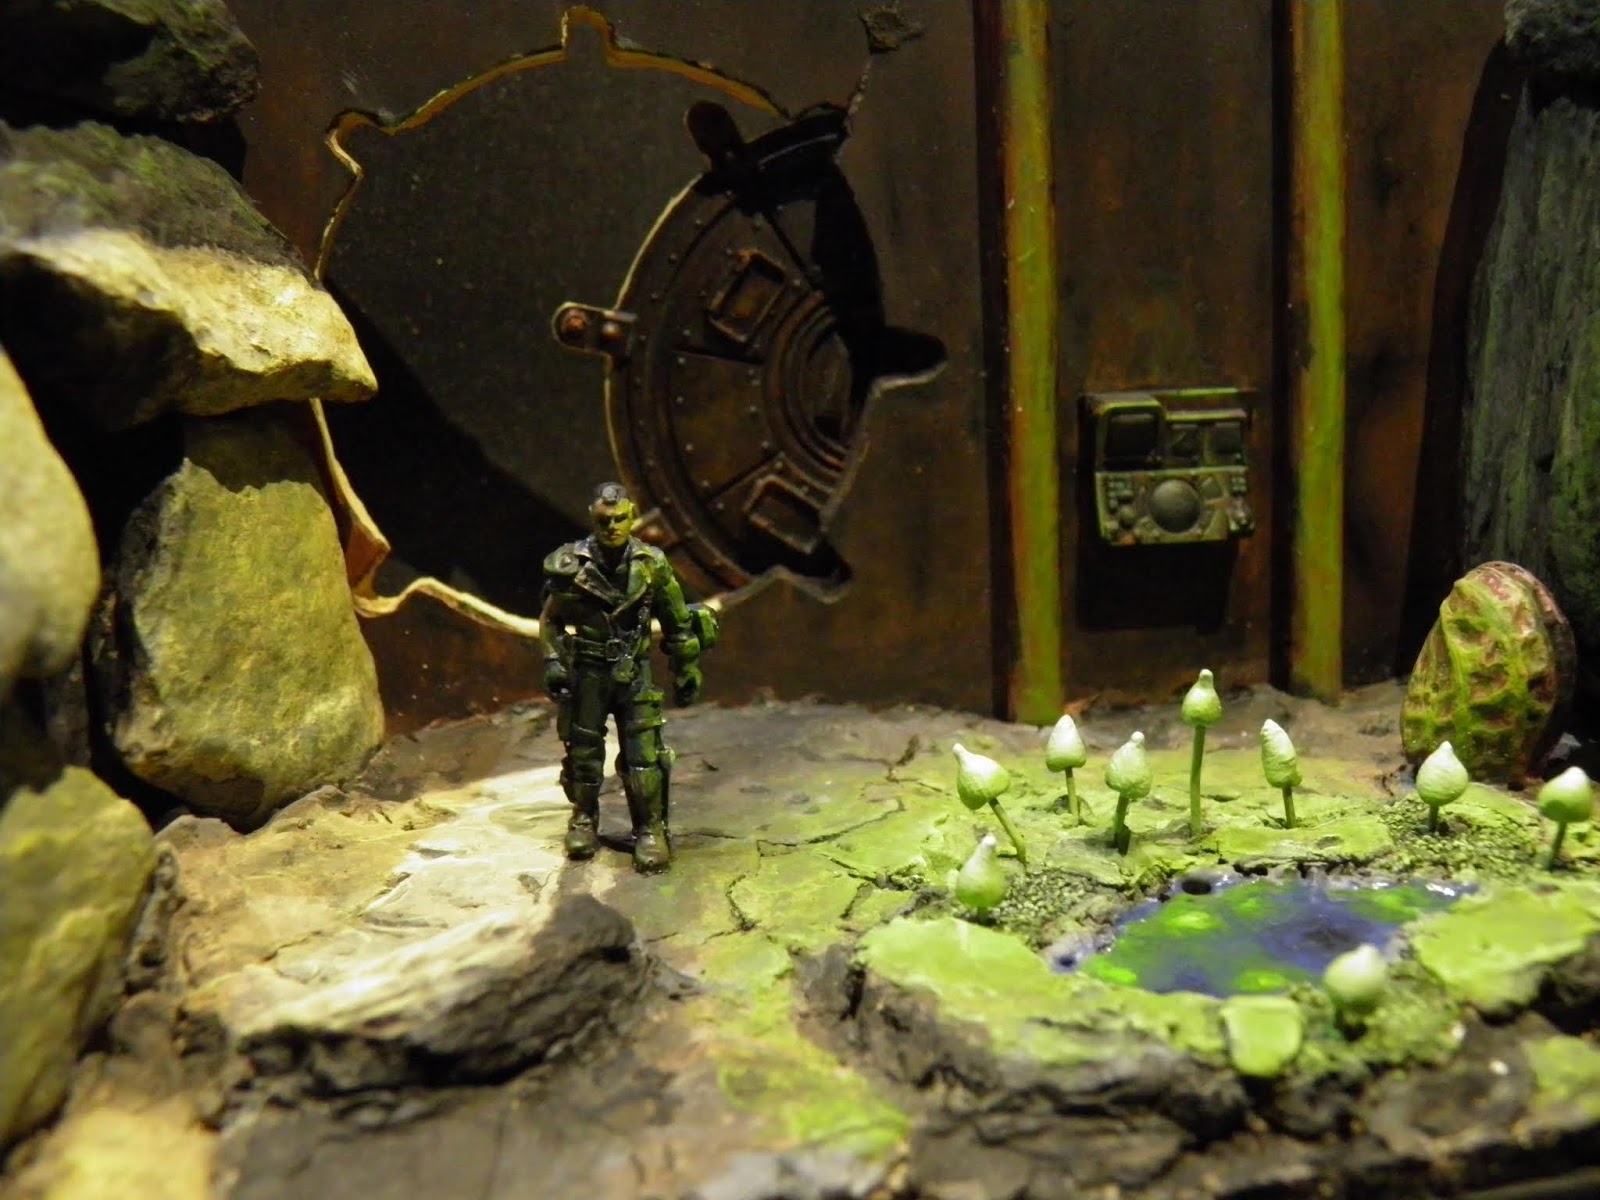 What's On Your Table: Fallout Diorama - Faeit 212